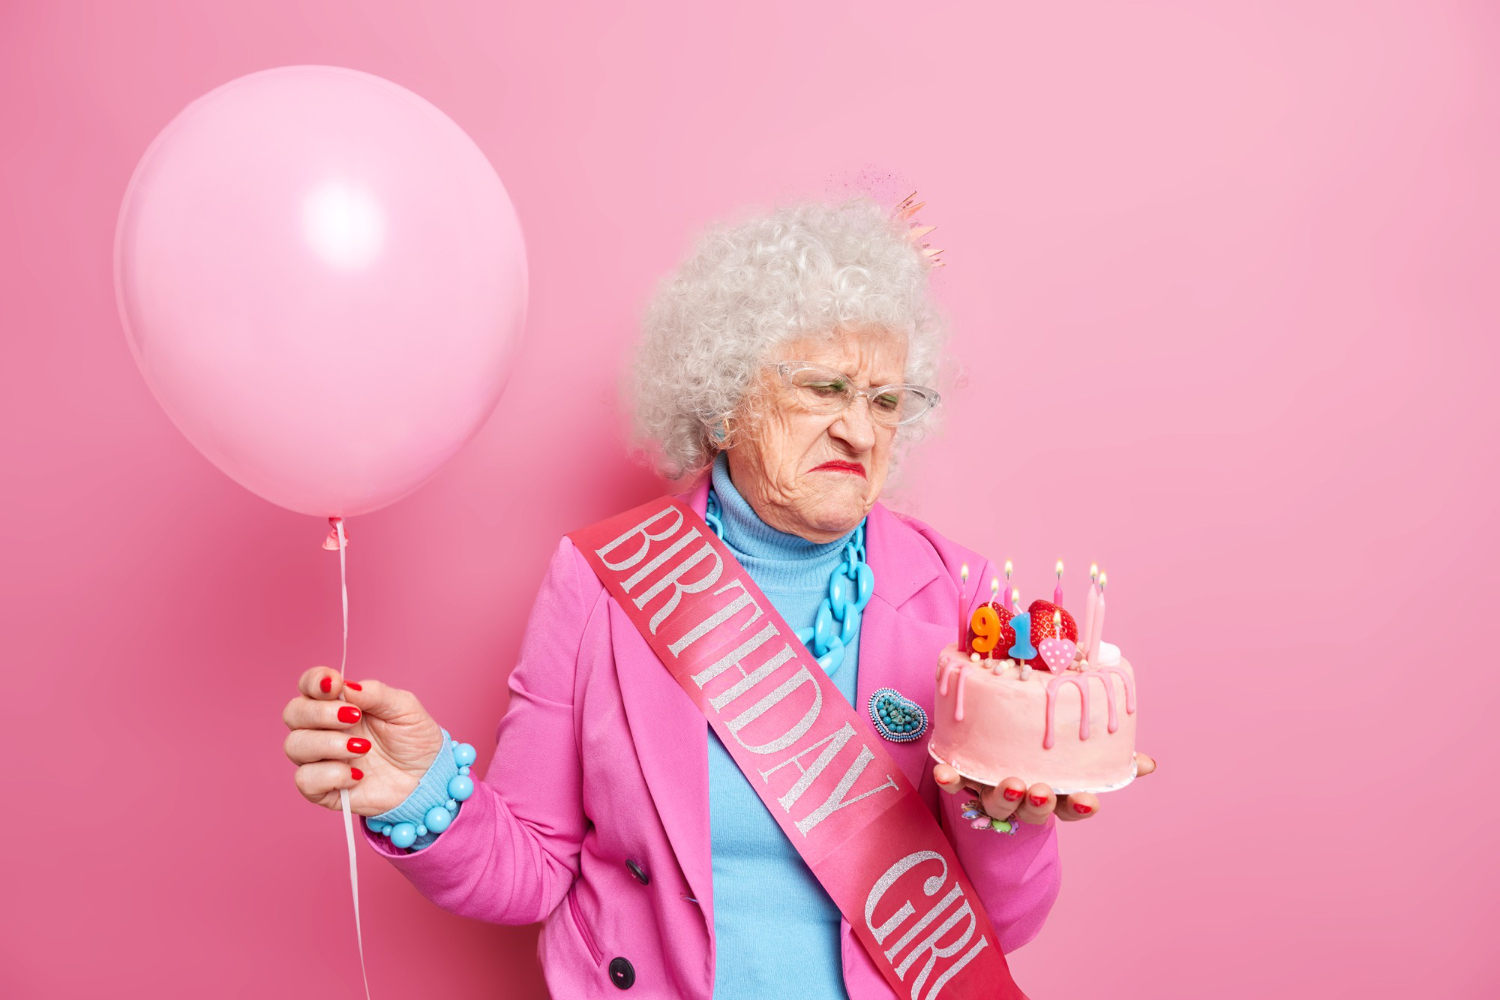 old grey haired beautiful woman looks displeased birthday cake festive outfit holds inflated balloon